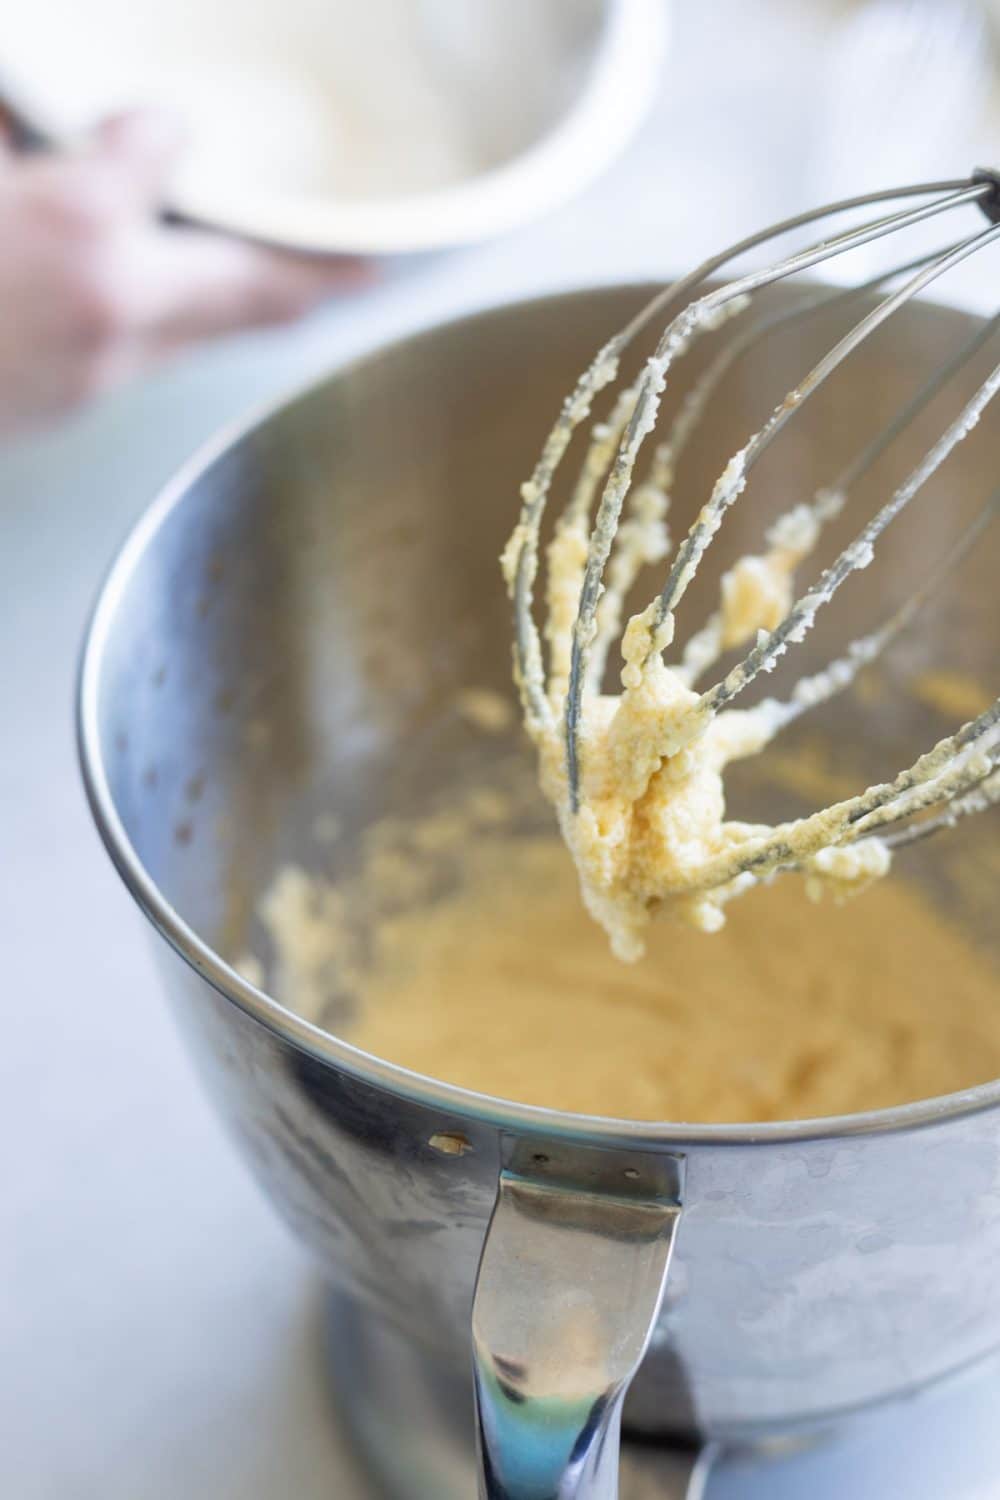 yellow cake batter on the whisk attachment of a silver stand mixer